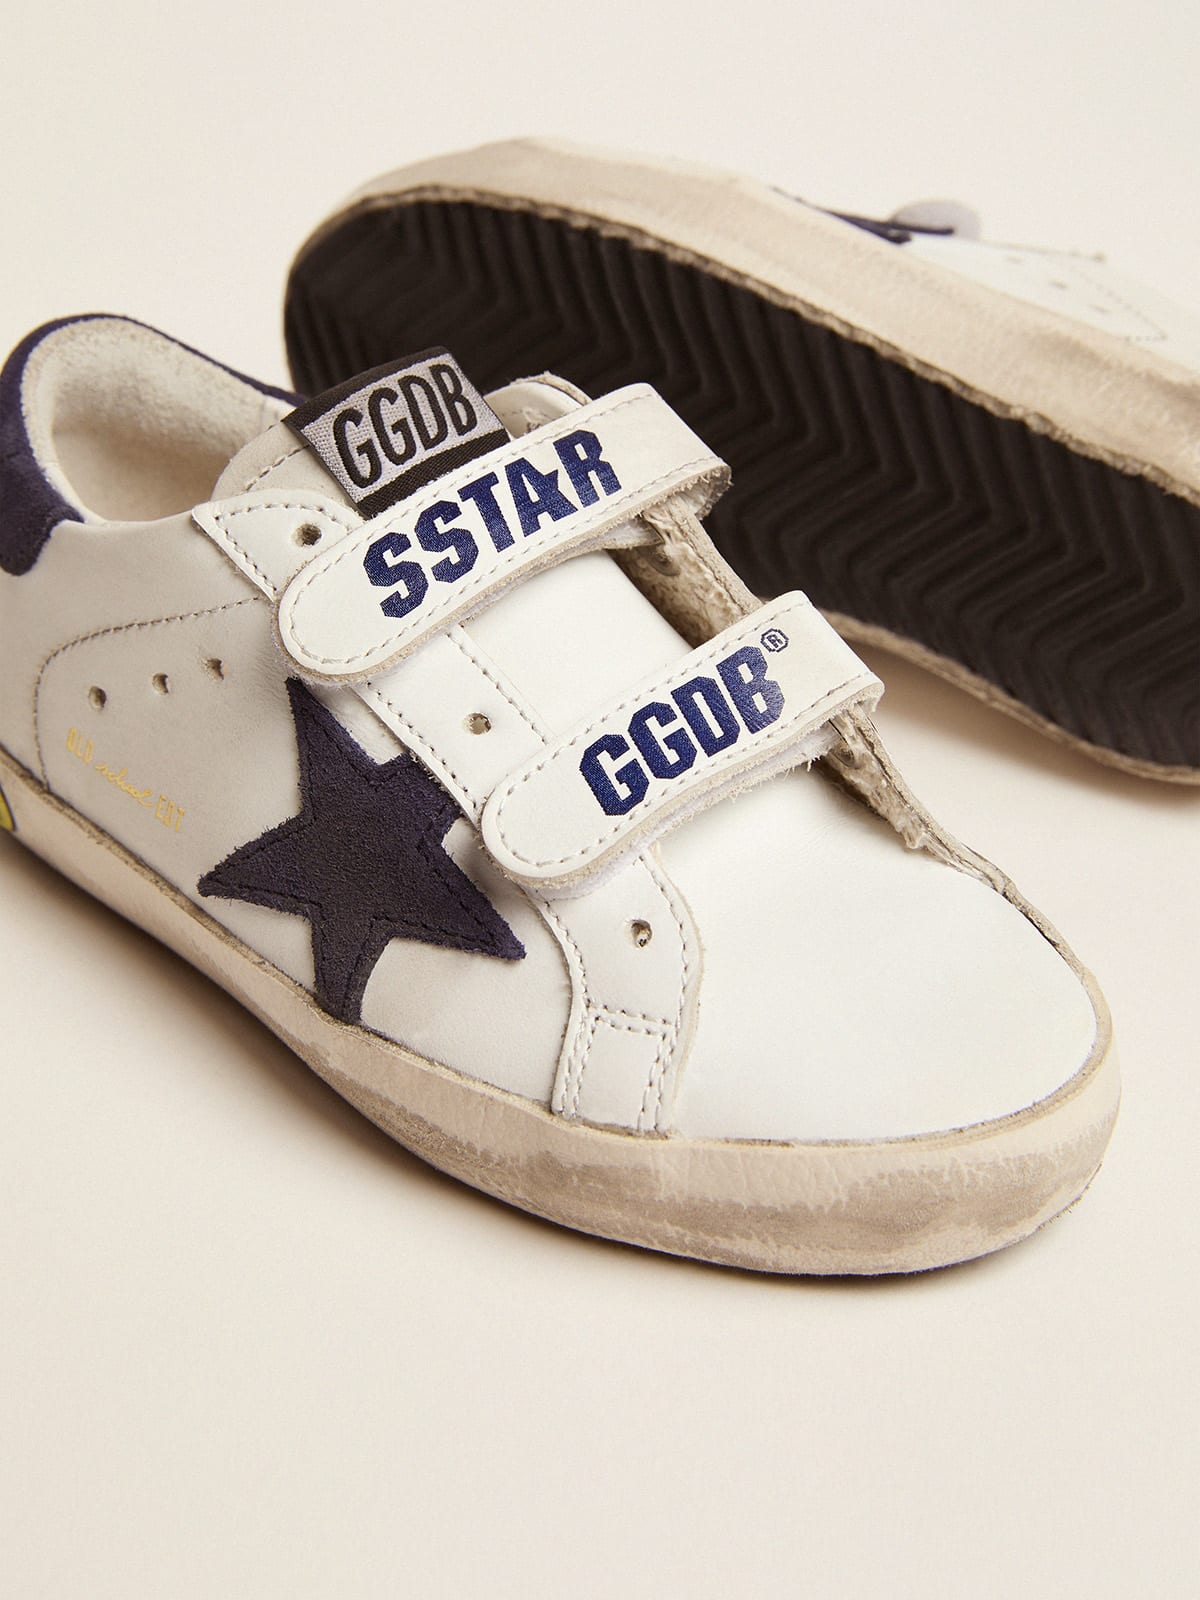 Golden Goose - Young Old School with dark blue inserts in 